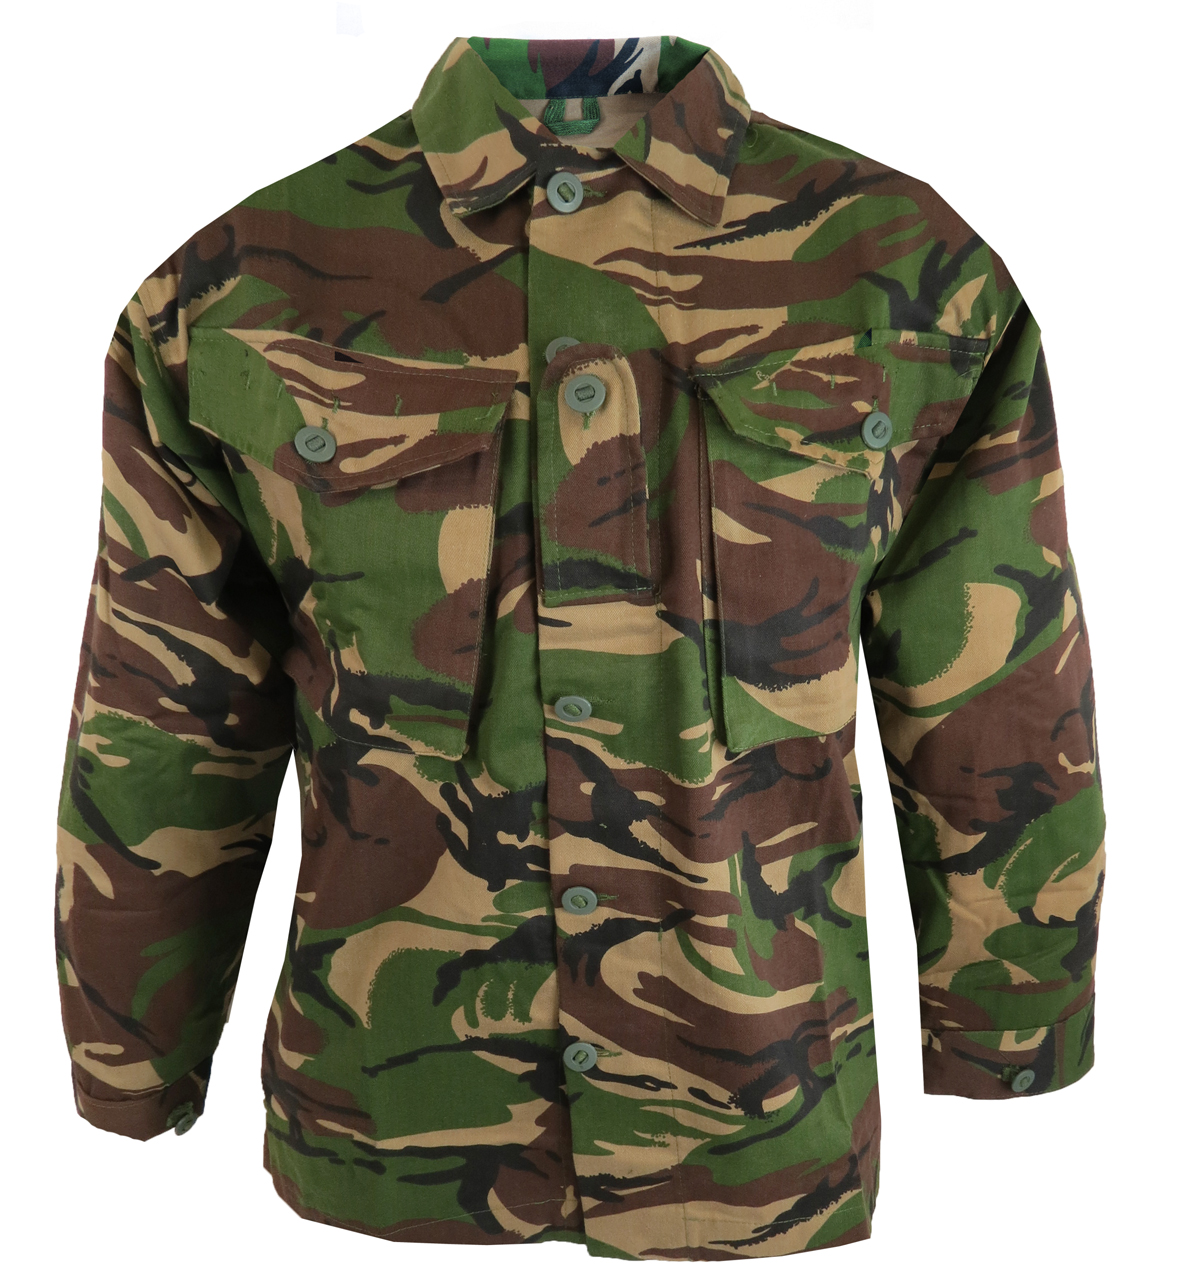 Station reach Scrutiny Soldier 95 Style Long Sleeve Shirt by Mean and Green